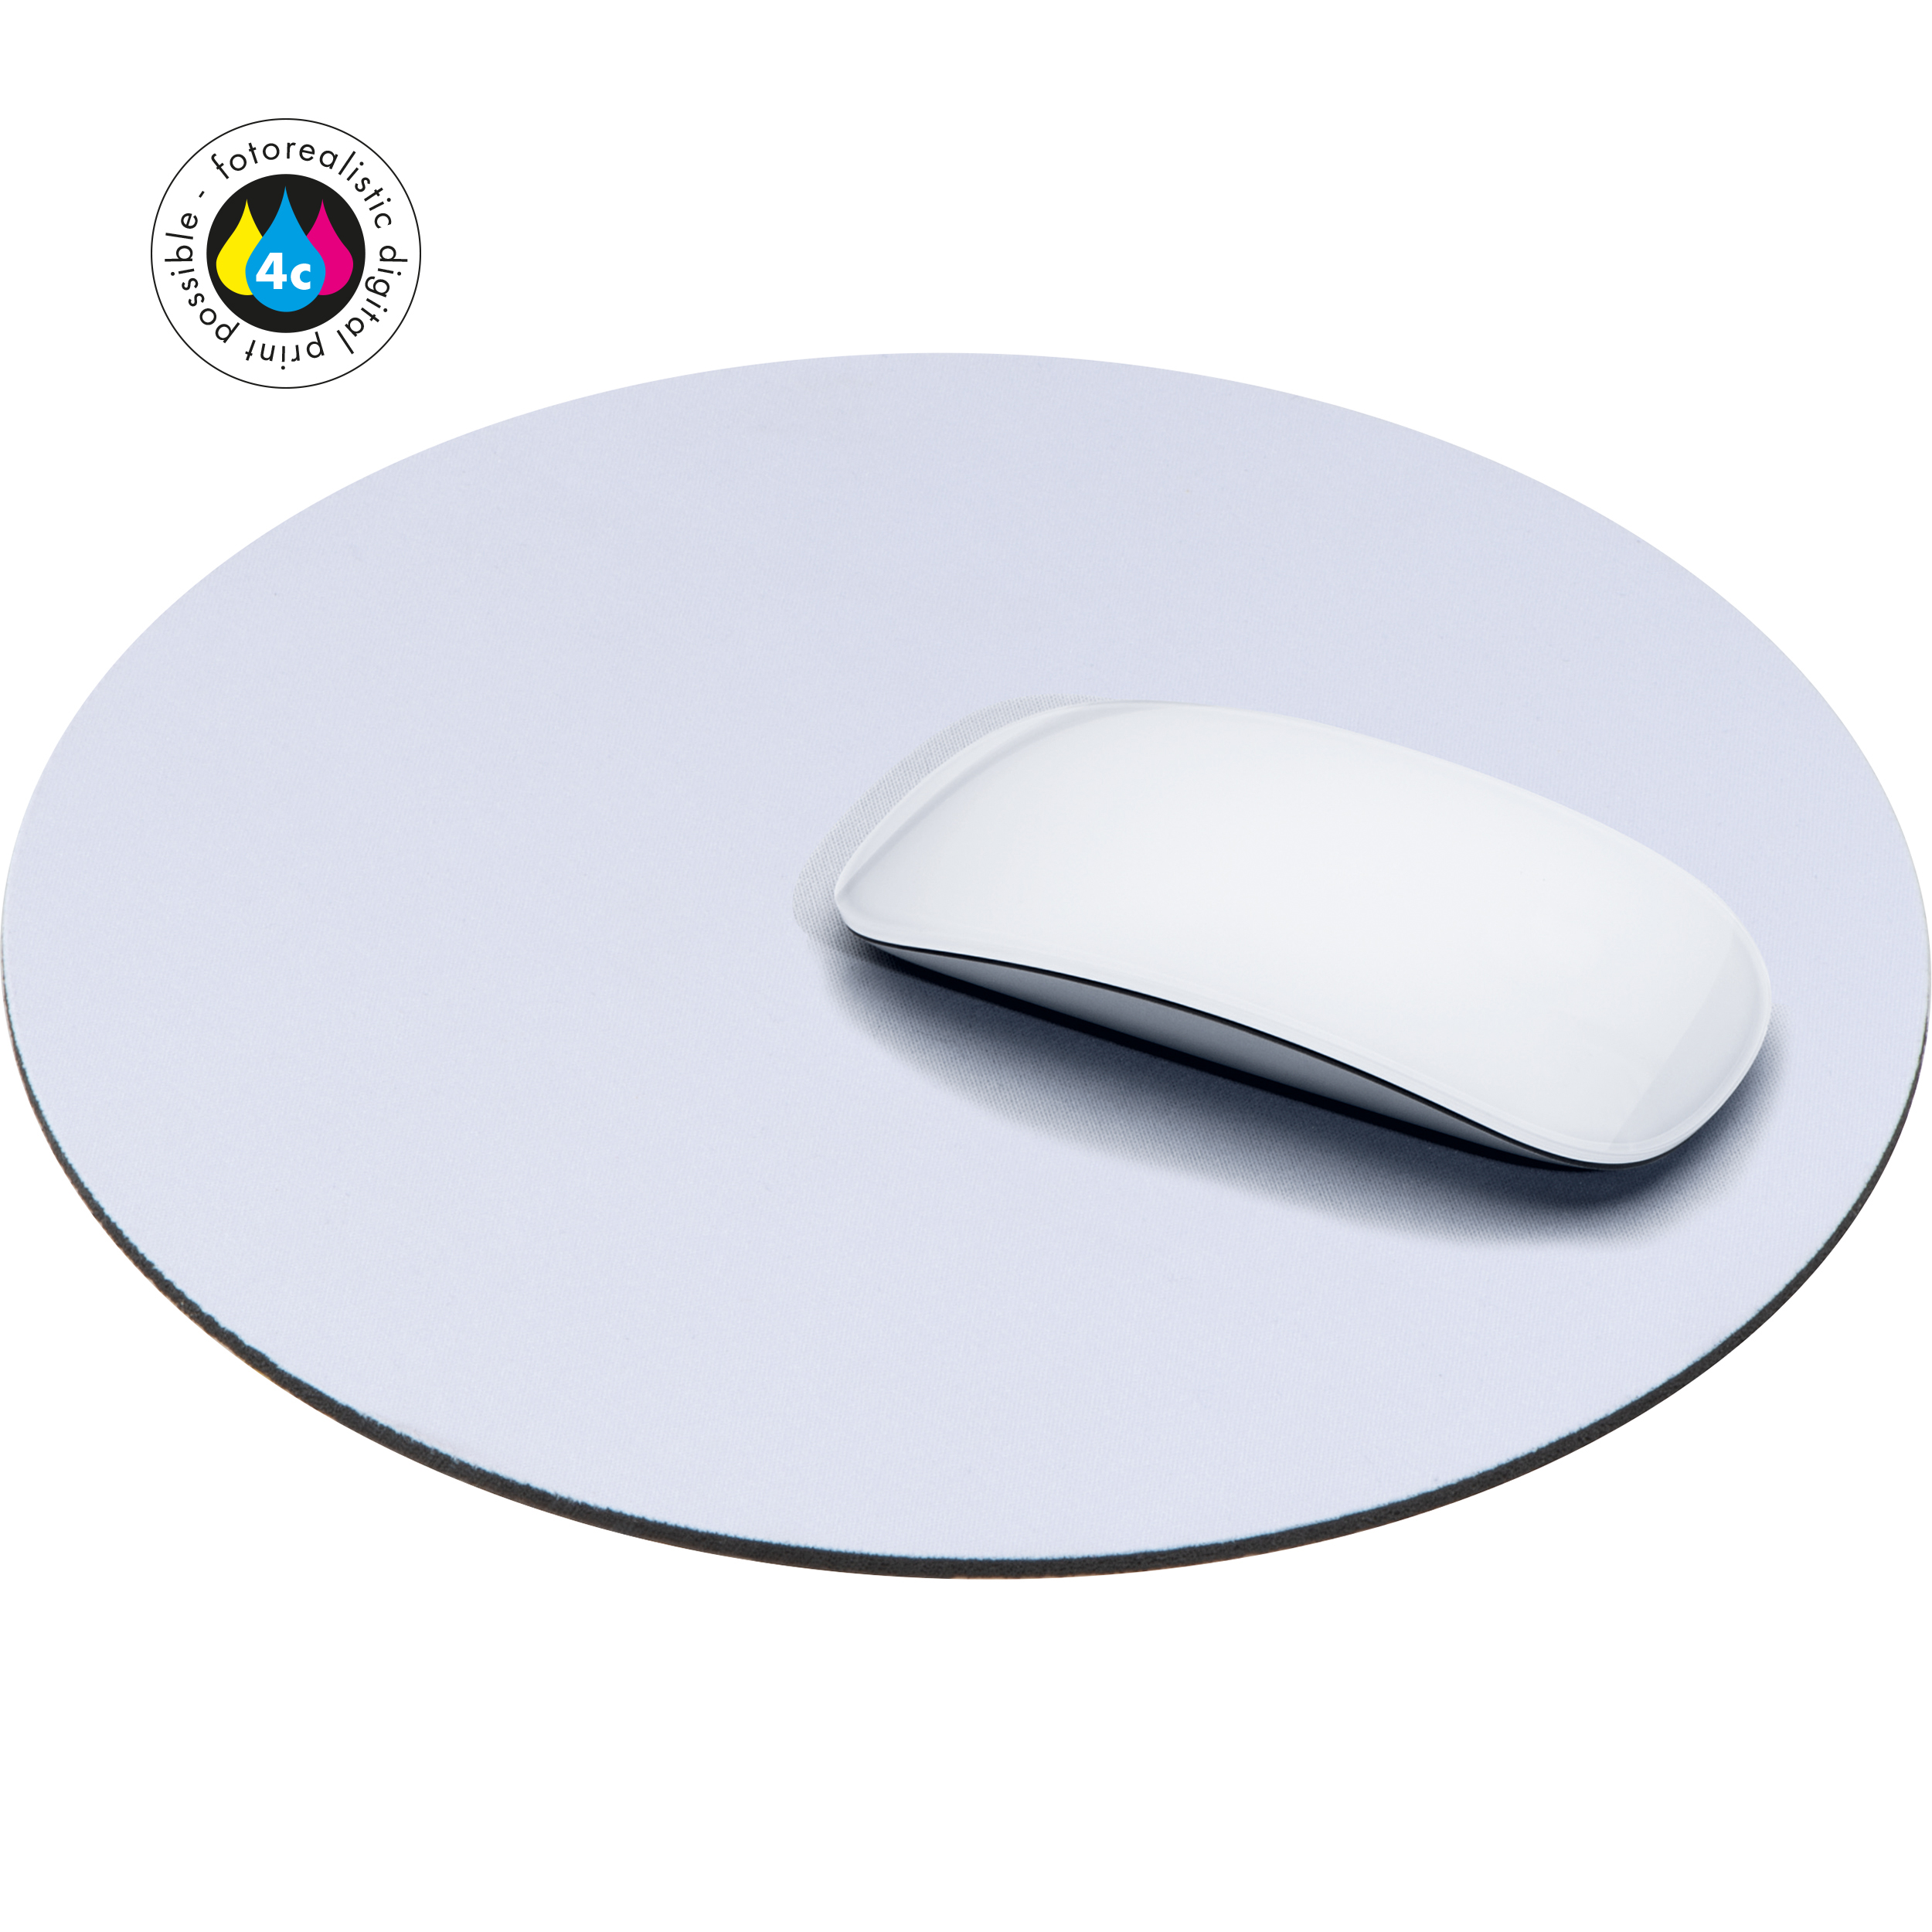 Rundes Mousepad